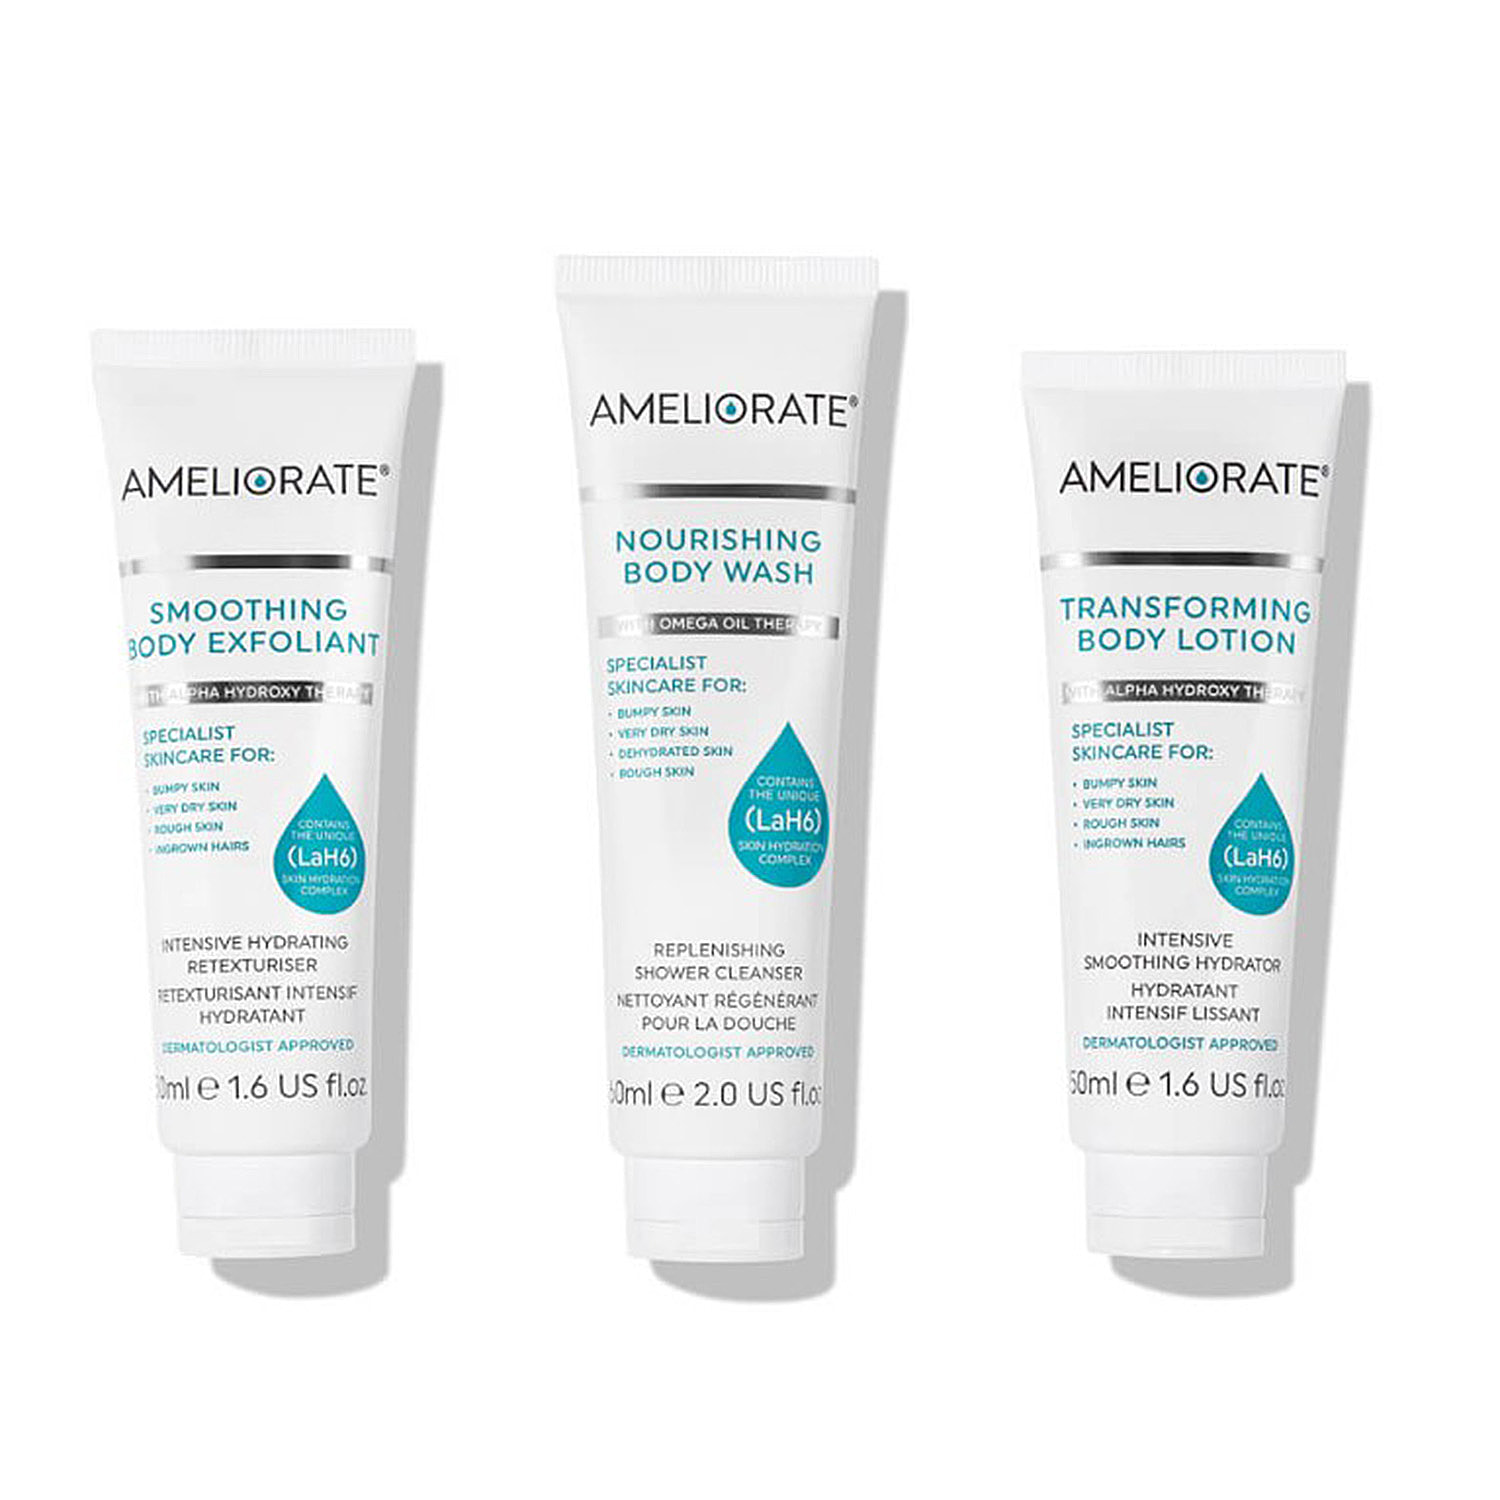 One Time Closeout- Ameliorate 3 Steps to Smooth Skin - Intensive Smoothing Bodycare Remige